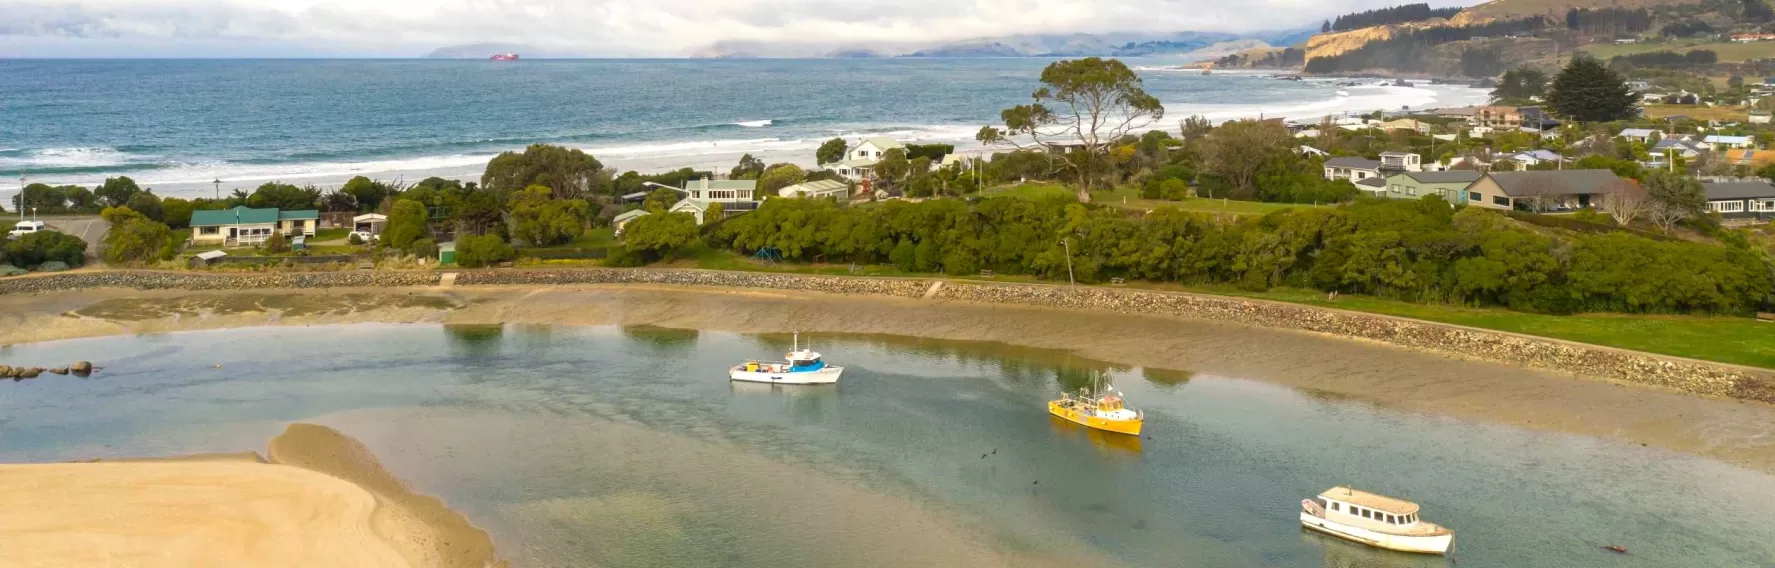 Aerial shot over boats in Waikouaiti River in Karitane, looking out to sea.